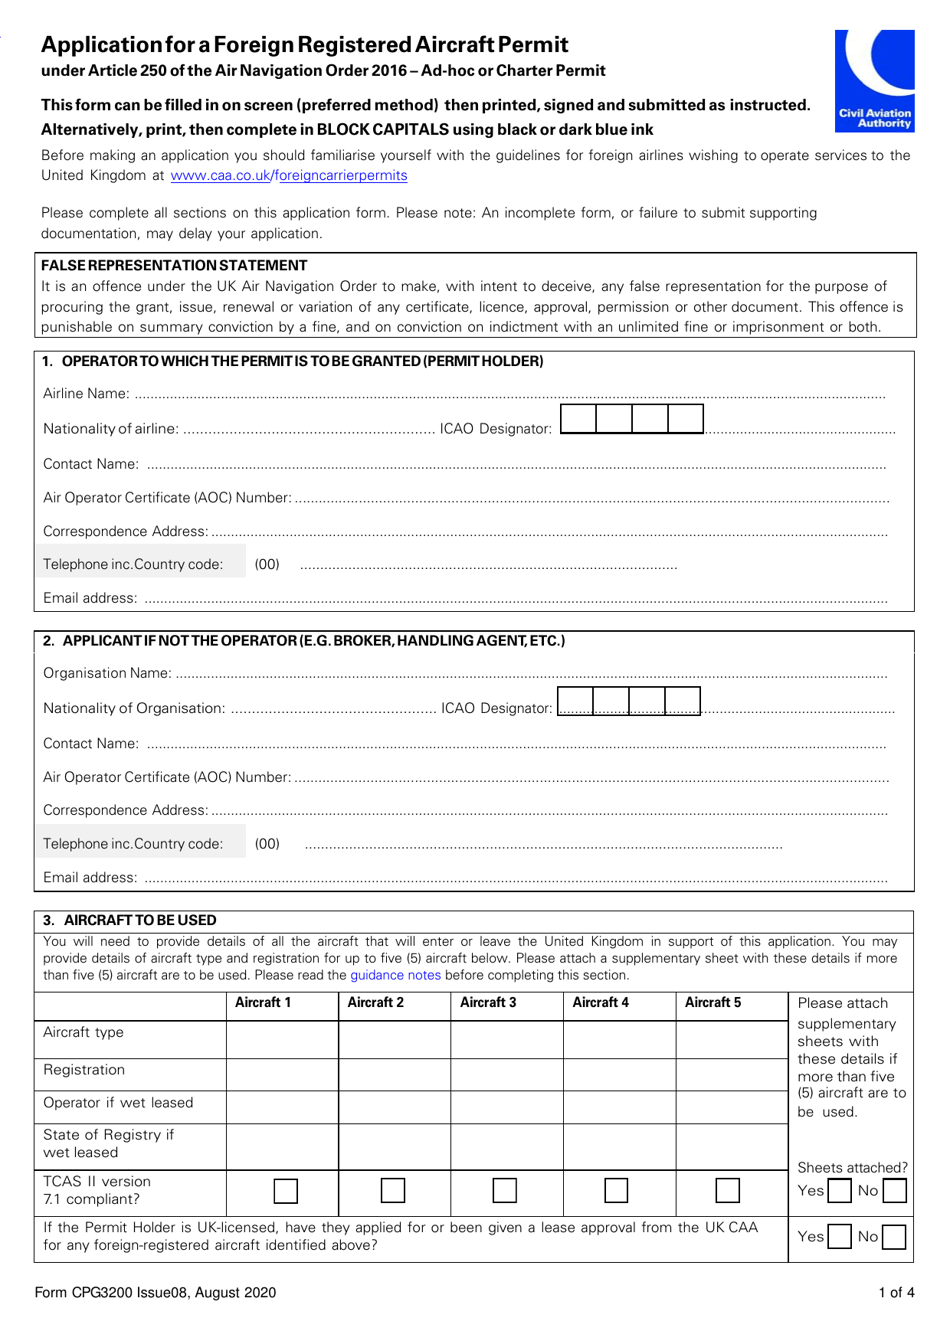 Form CPG3200 Application for a Foreign Registered Aircraft Permit Under Article 250 of the Air Navigation Order 2016 - Ad-Hoc or Charter Permit - United Kingdom, Page 1